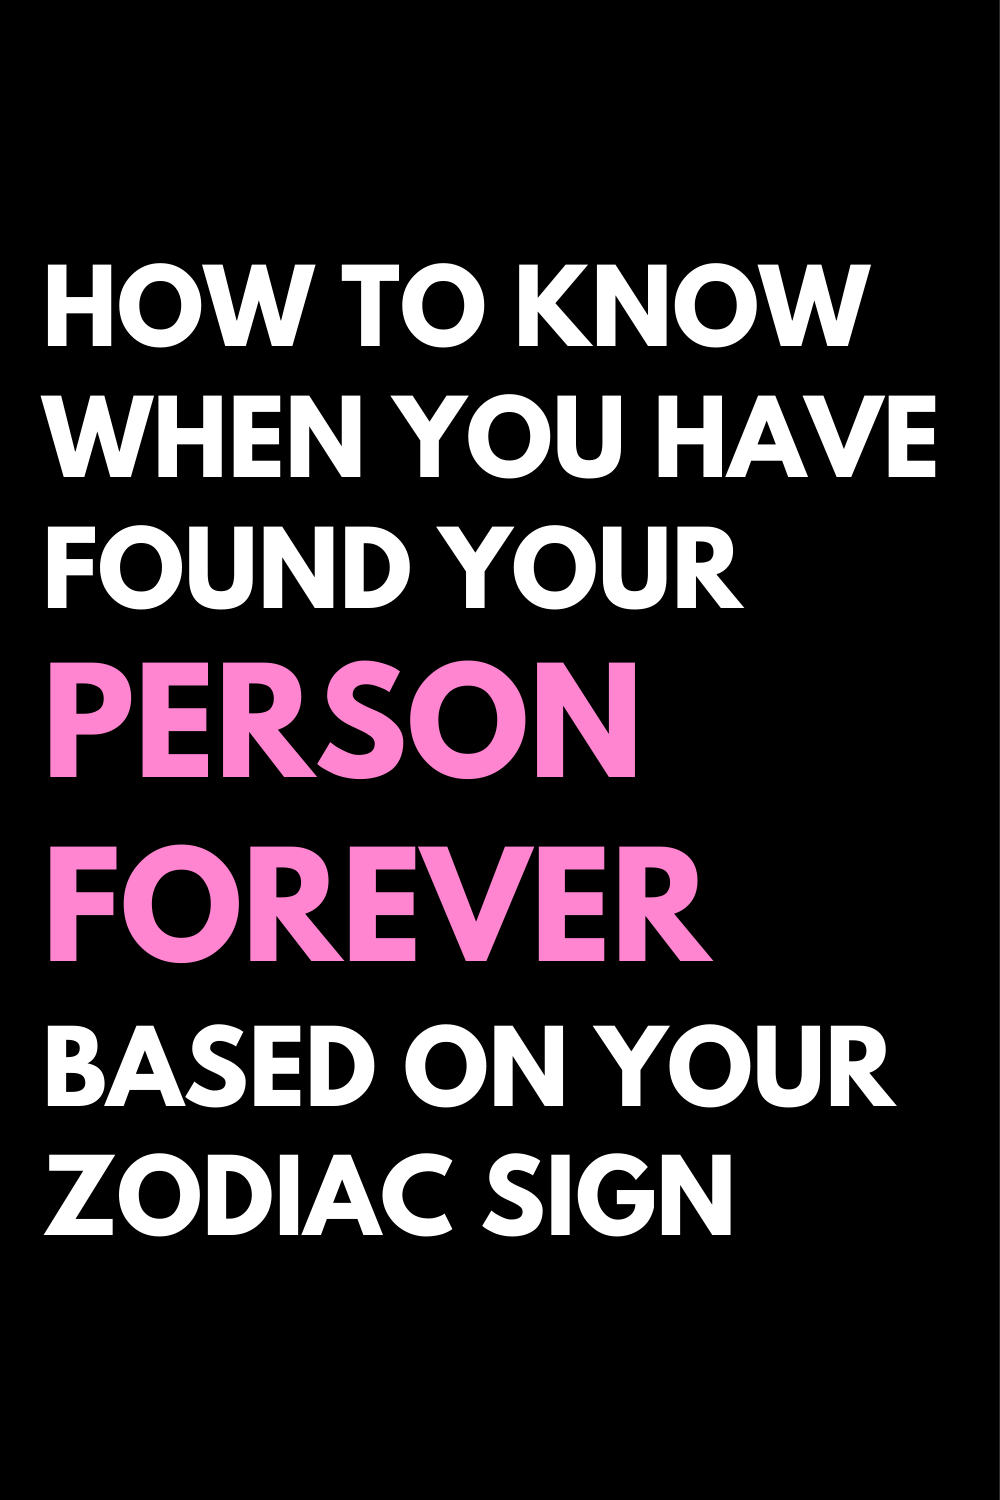 How To Know When You Have Found Your Person Forever Based On Your Zodiac Sign